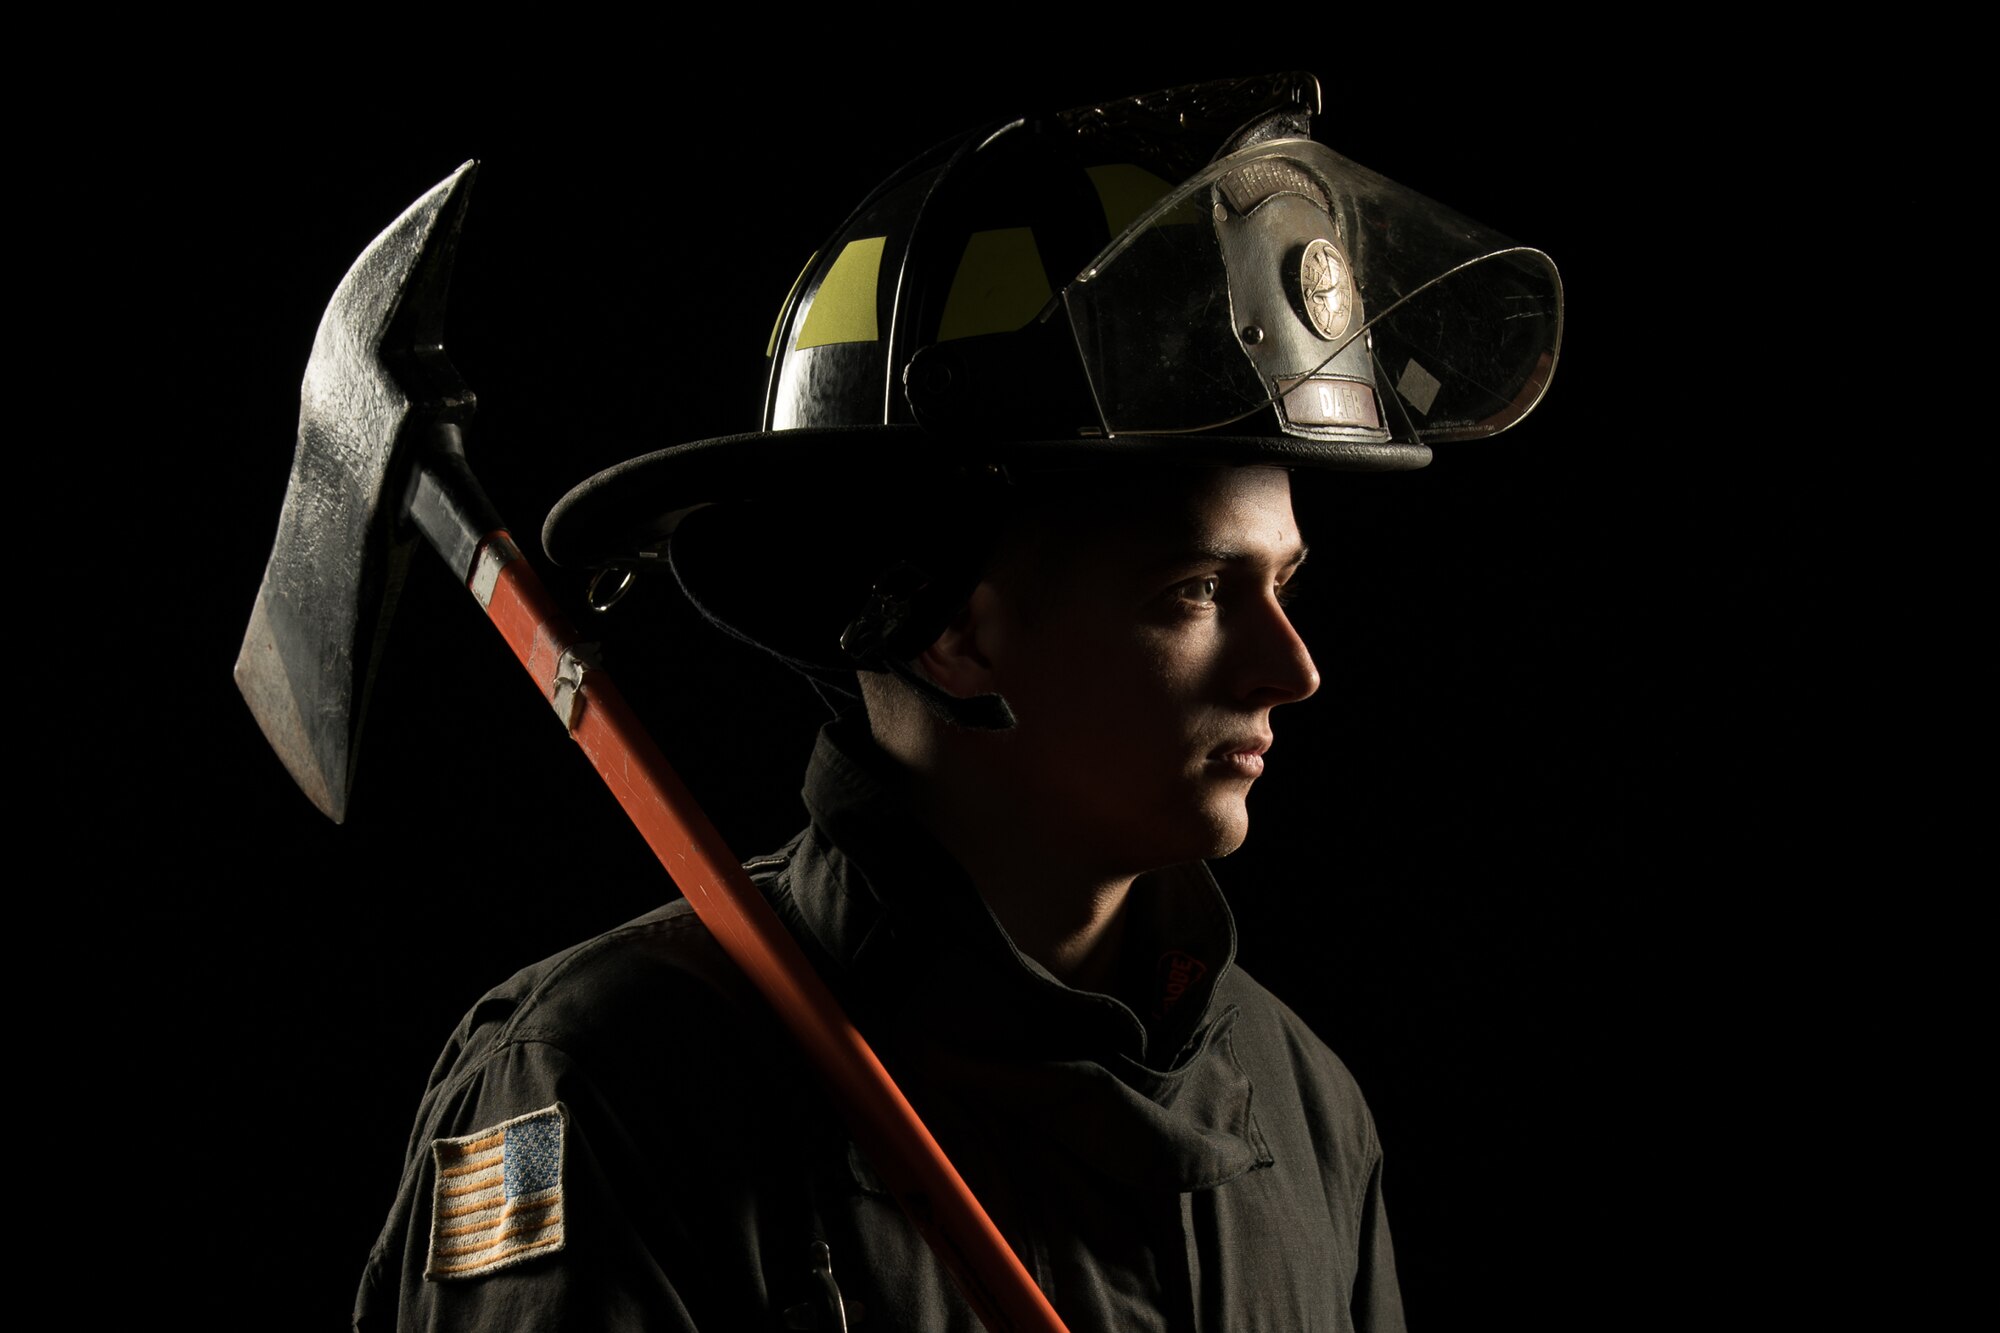 Senior Airman Andrew Frost, 436th Civil Engineer Squadron driver operator, poses for Fire Prevention Week Oct. 1, 2019, at Dover Air Force Base, Del. First observed in 1925, Fire Prevention Week is the longest running public health observance in the United States. (U.S. Air Force photo by Mauricio Campino)